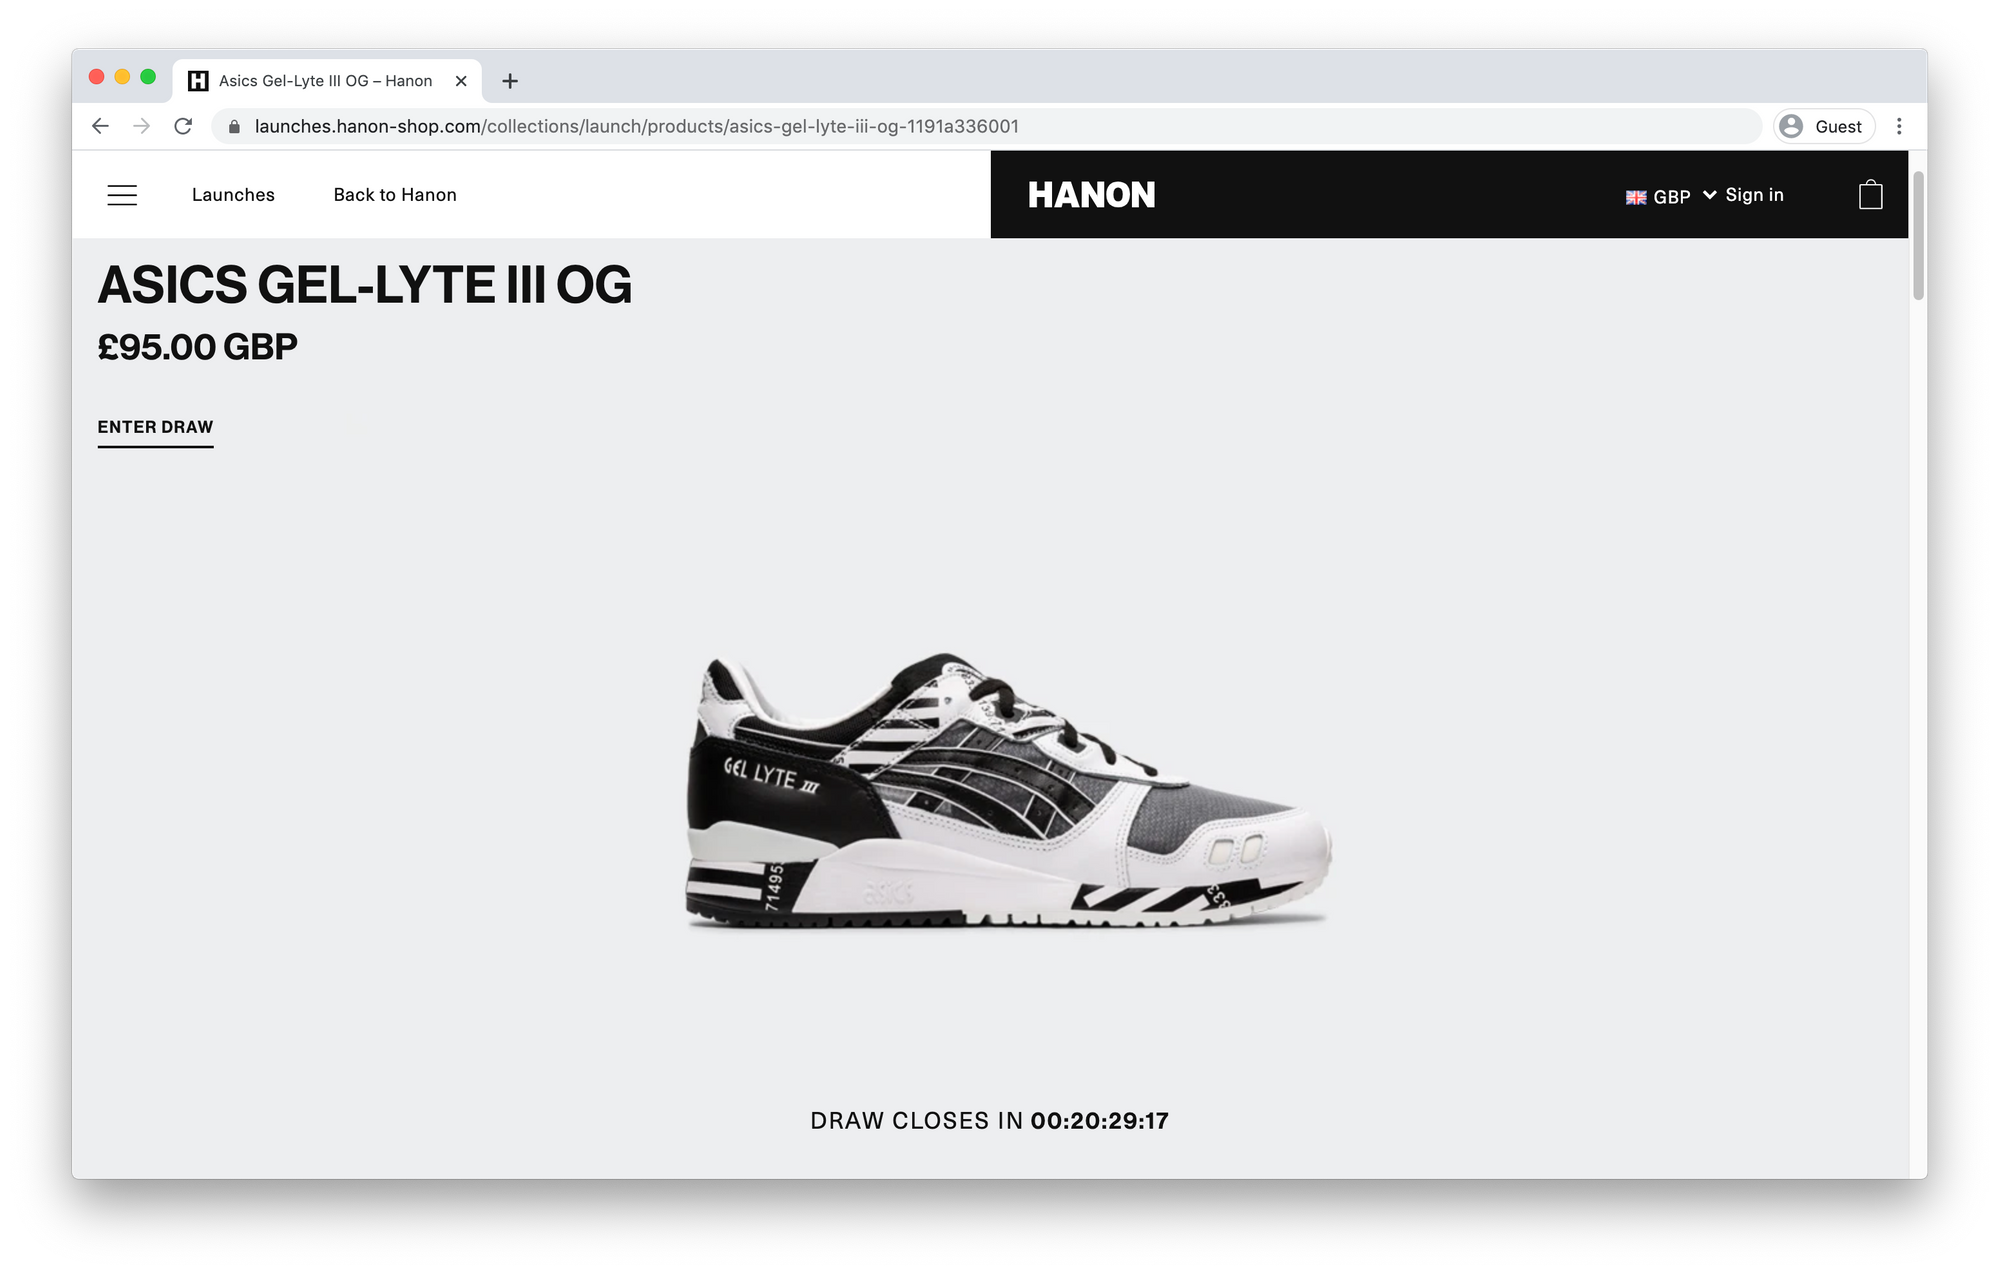 How to set up a sneaker raffle campaign